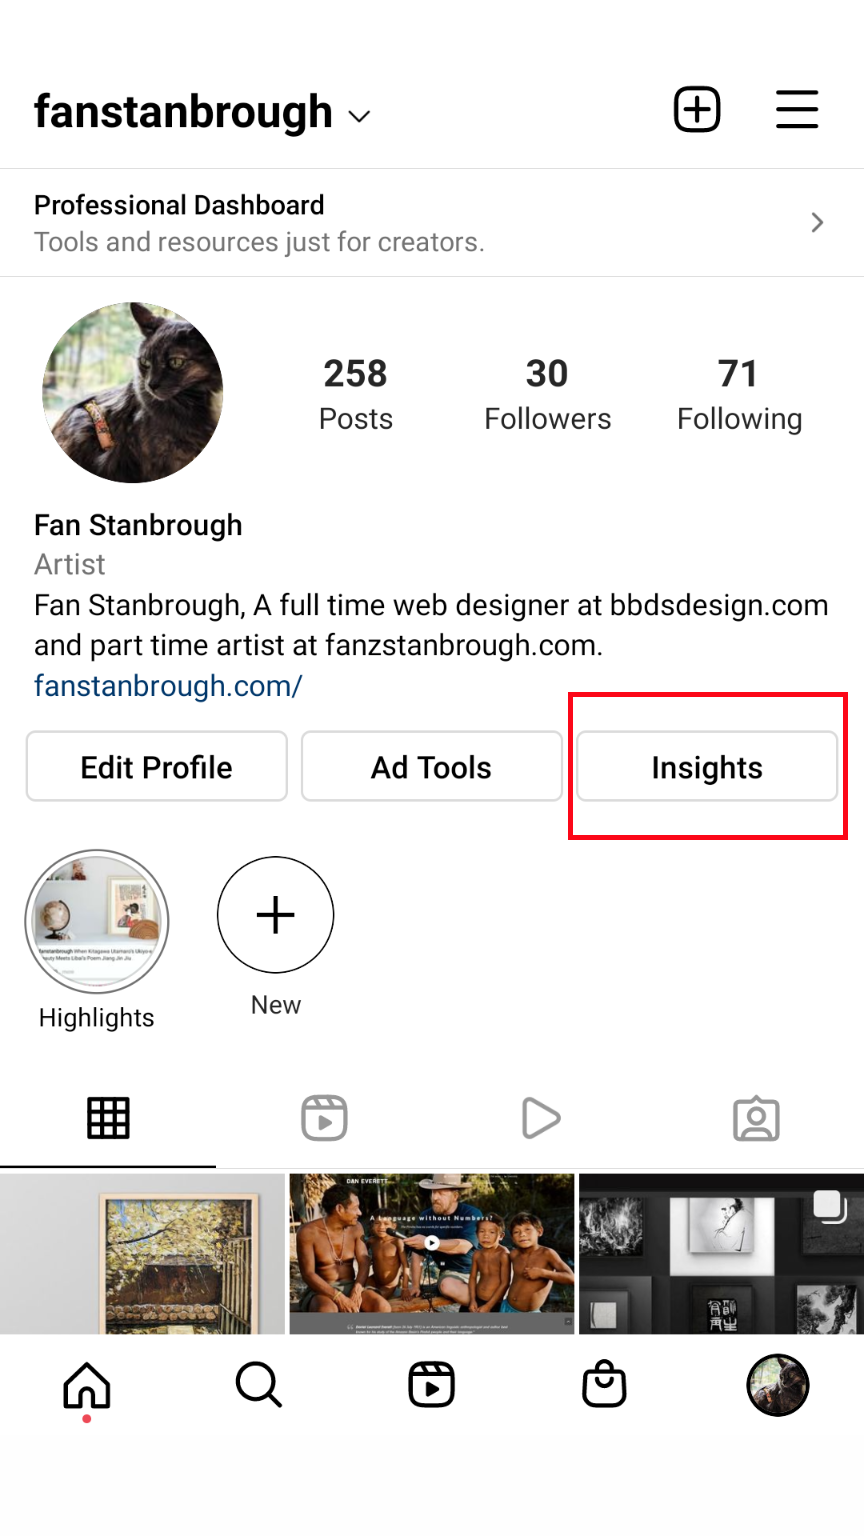 Insights button on the App